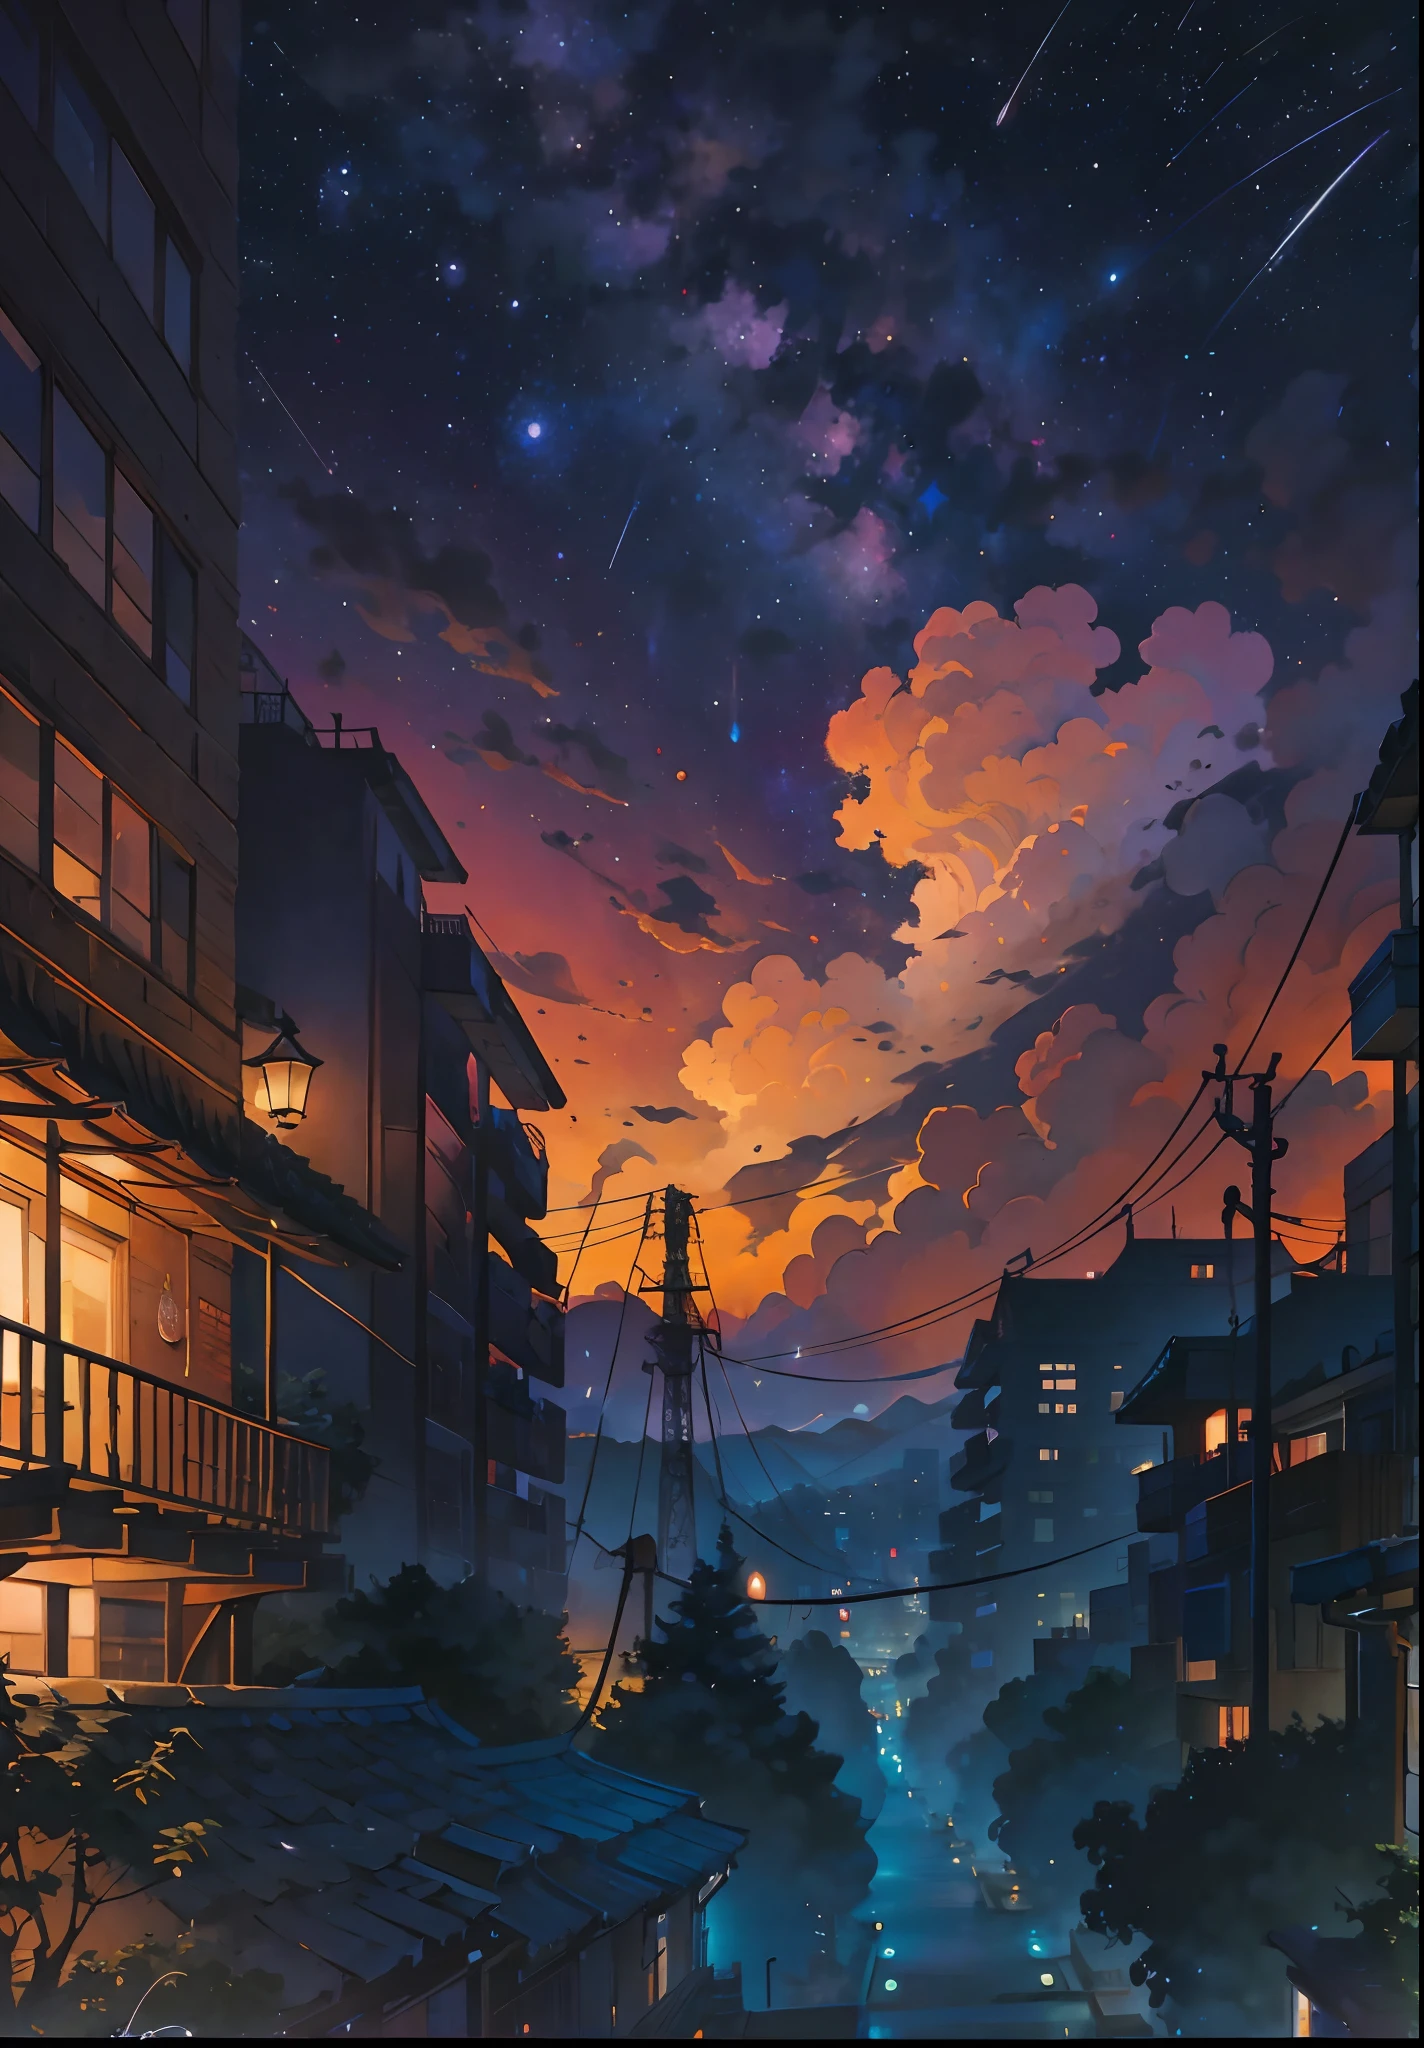 Octanes, The sky, star (The sky), scenery, a starry sky, the night, 1 girl, night  sky, solo, Plein Air, signature, building, Cloud, the Milky Way, seat, a tree, longye hair, The city, silhouette, Cityscape